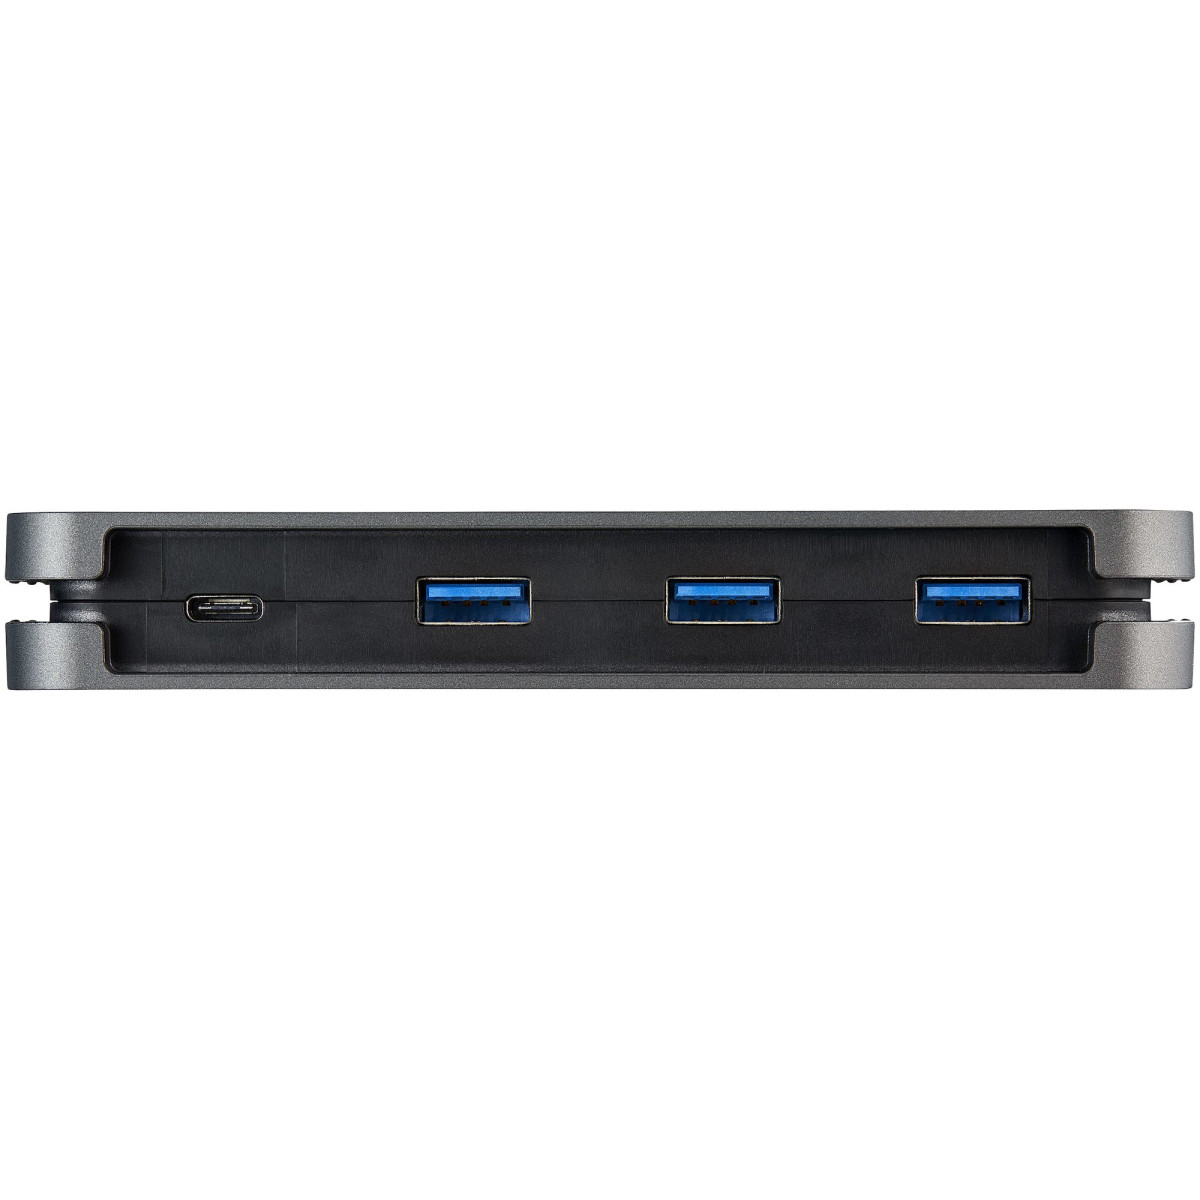 4 Port USB C Hub 5Gbps 3A/1C- 11in Cable